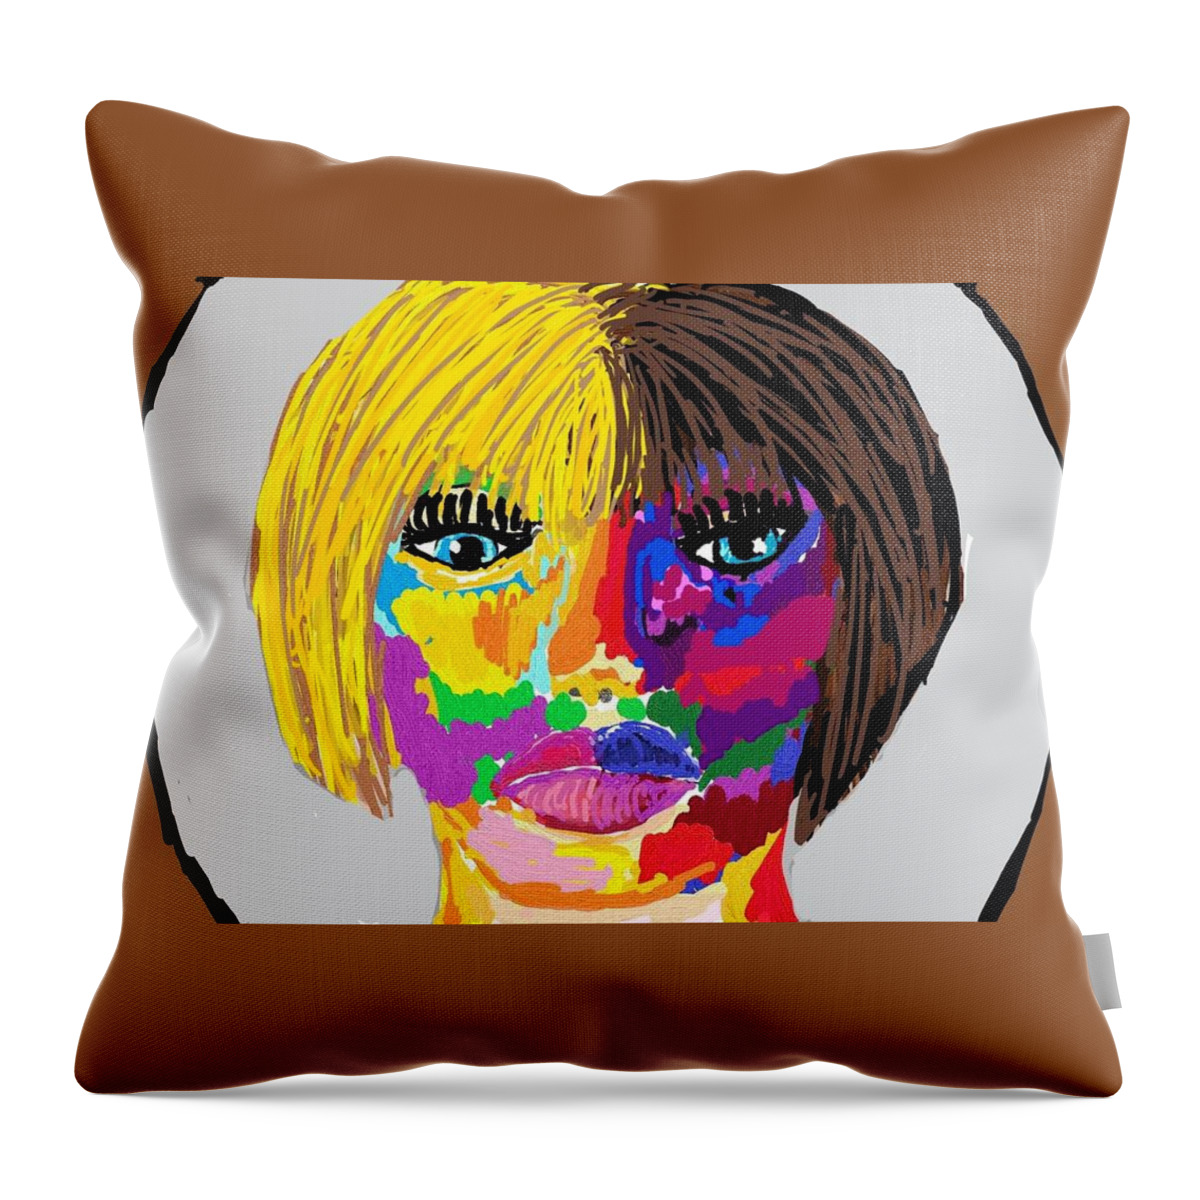 Girl Throw Pillow featuring the digital art Isolation by Diane Dahm